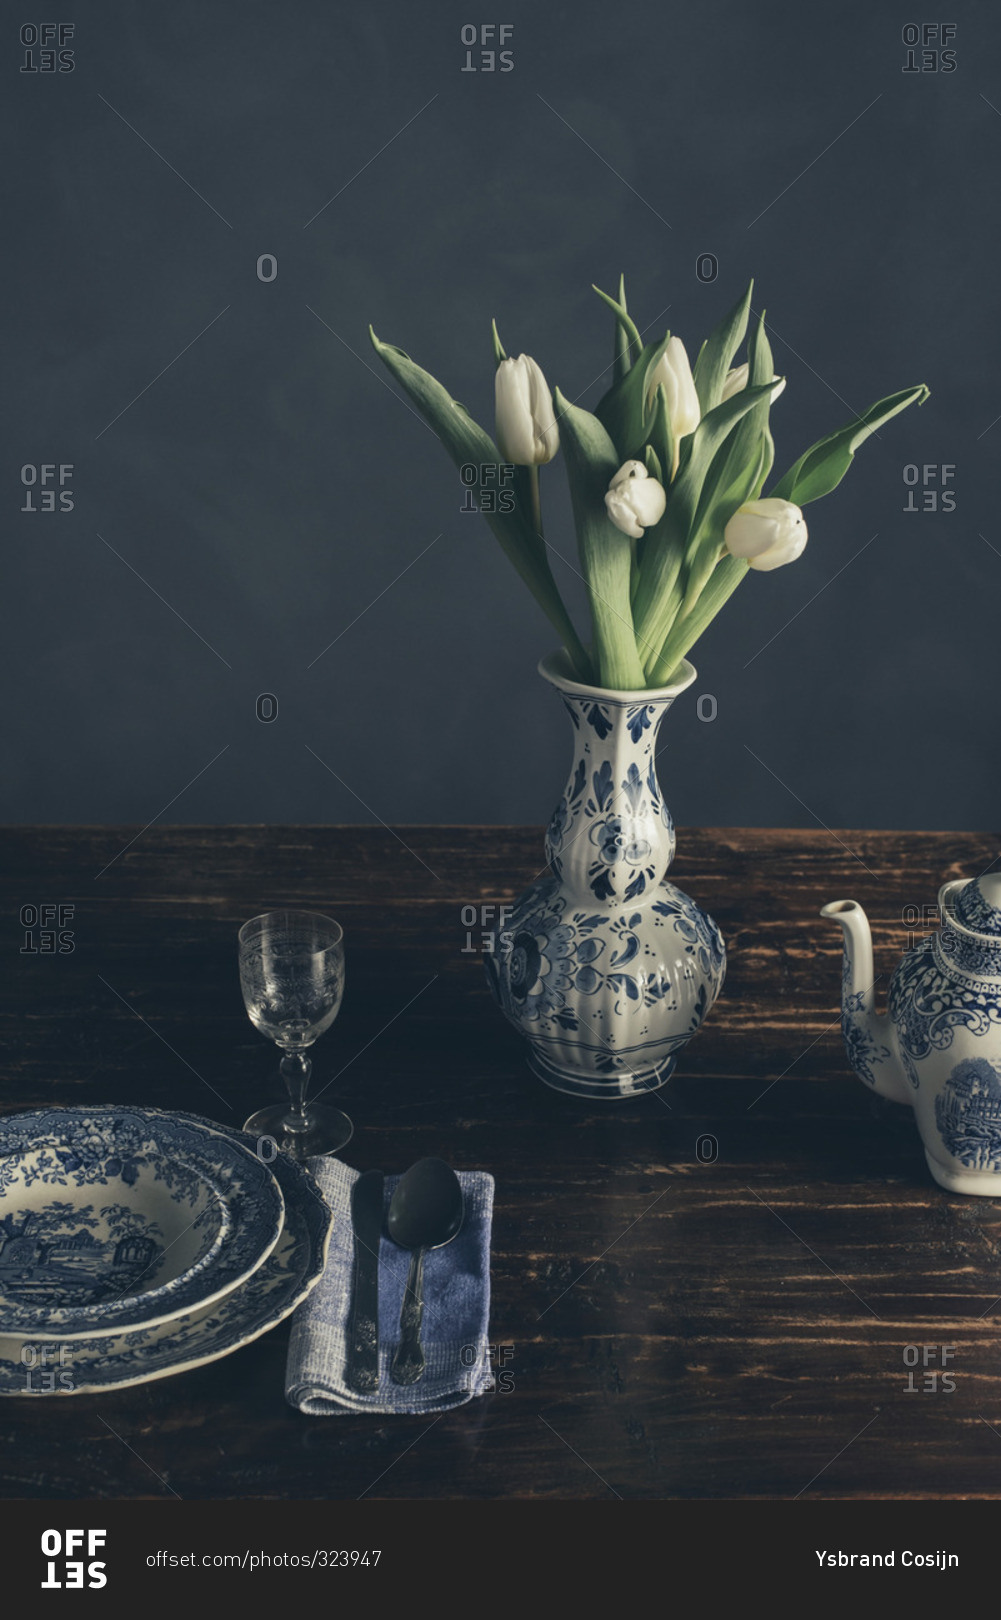 Still life of a vase of tulips and place setting on a wood table